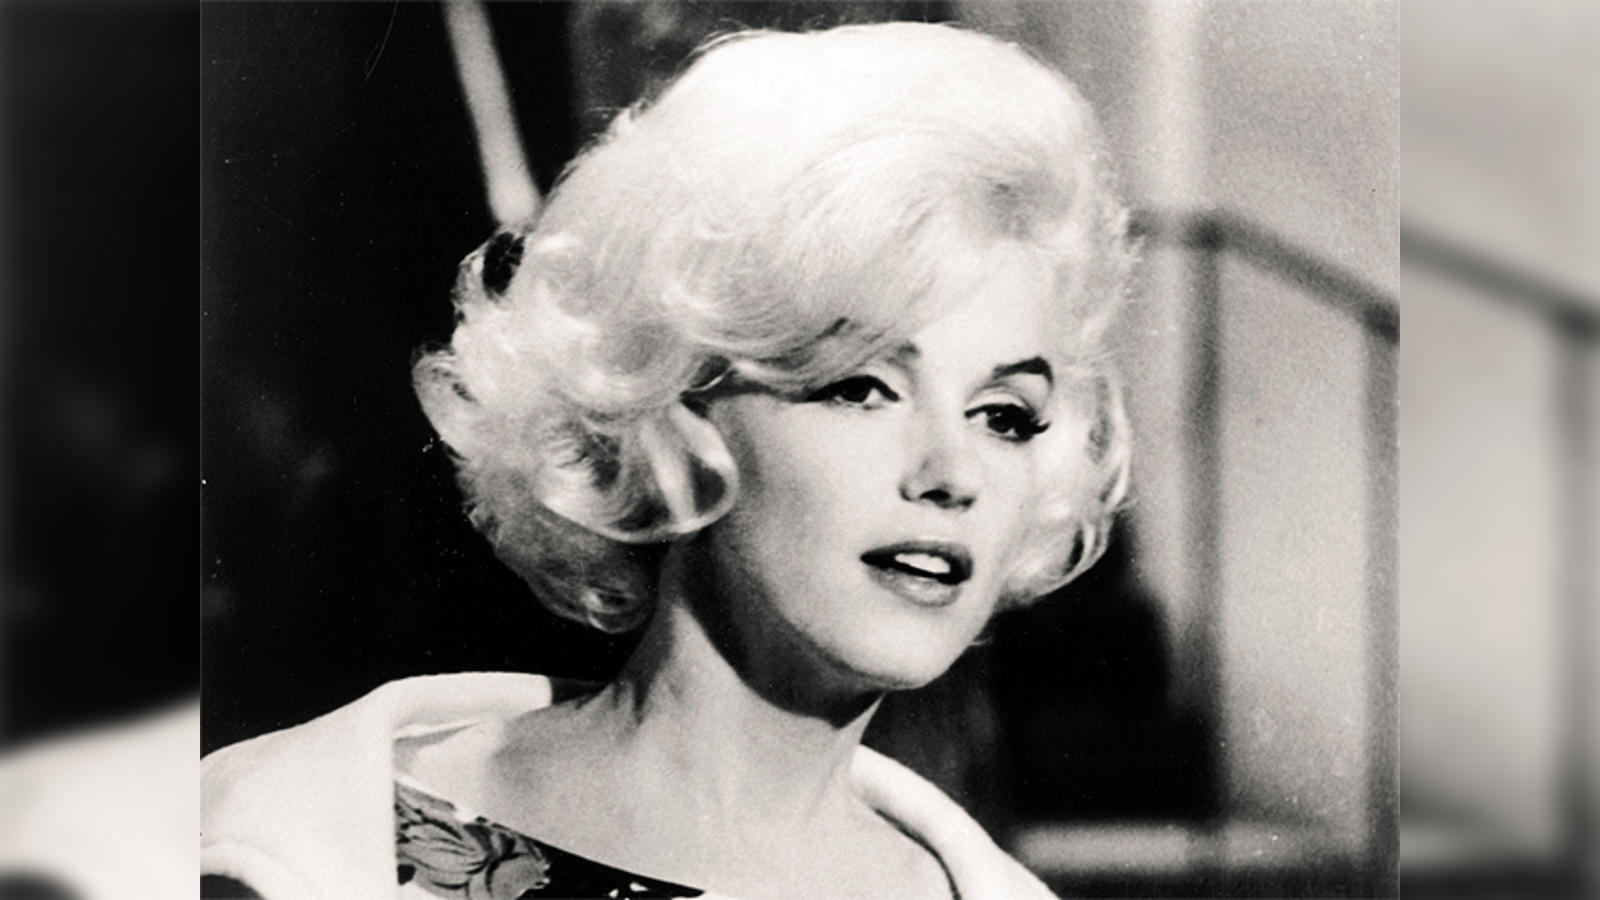 Newspapers.com - Actress and cultural icon Marilyn Monroe was found dead in  her Los Angeles home on August 5, 1962. The toxicology report revealed she  had died from a barbiturate overdose. Though